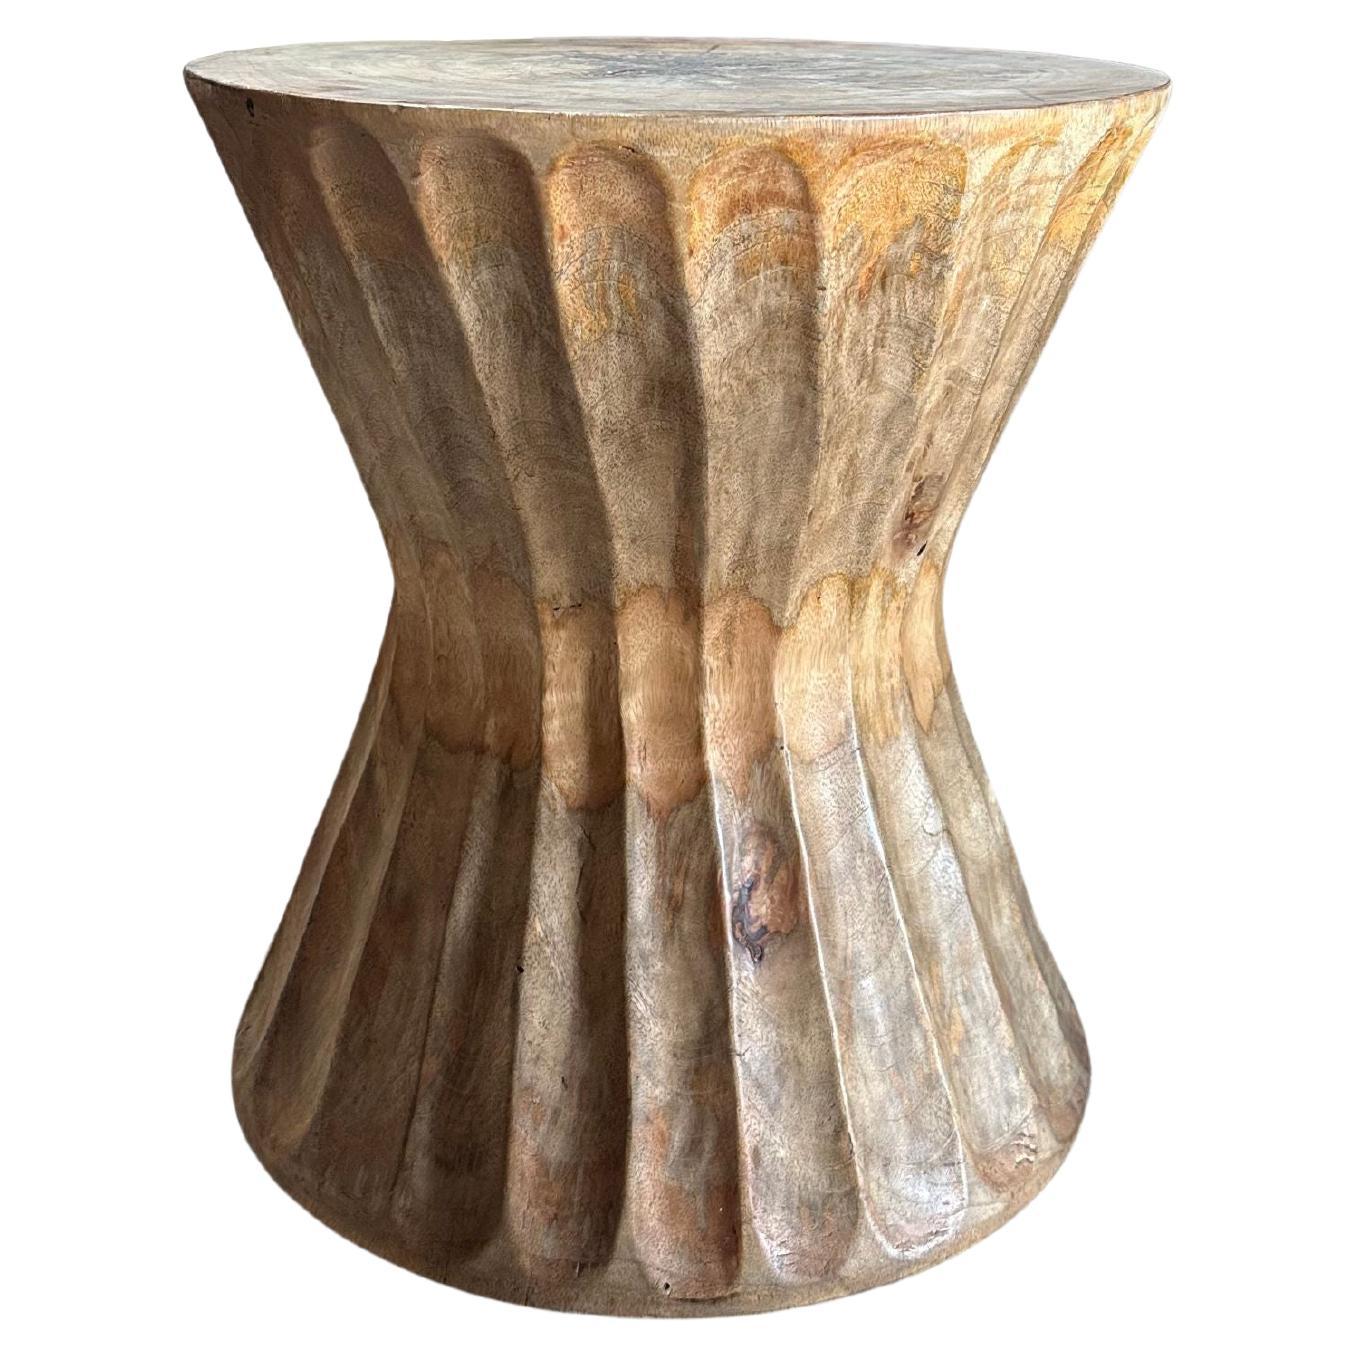 Round Mango Wood Side Table, Carved Detailing, Modern Organic For Sale